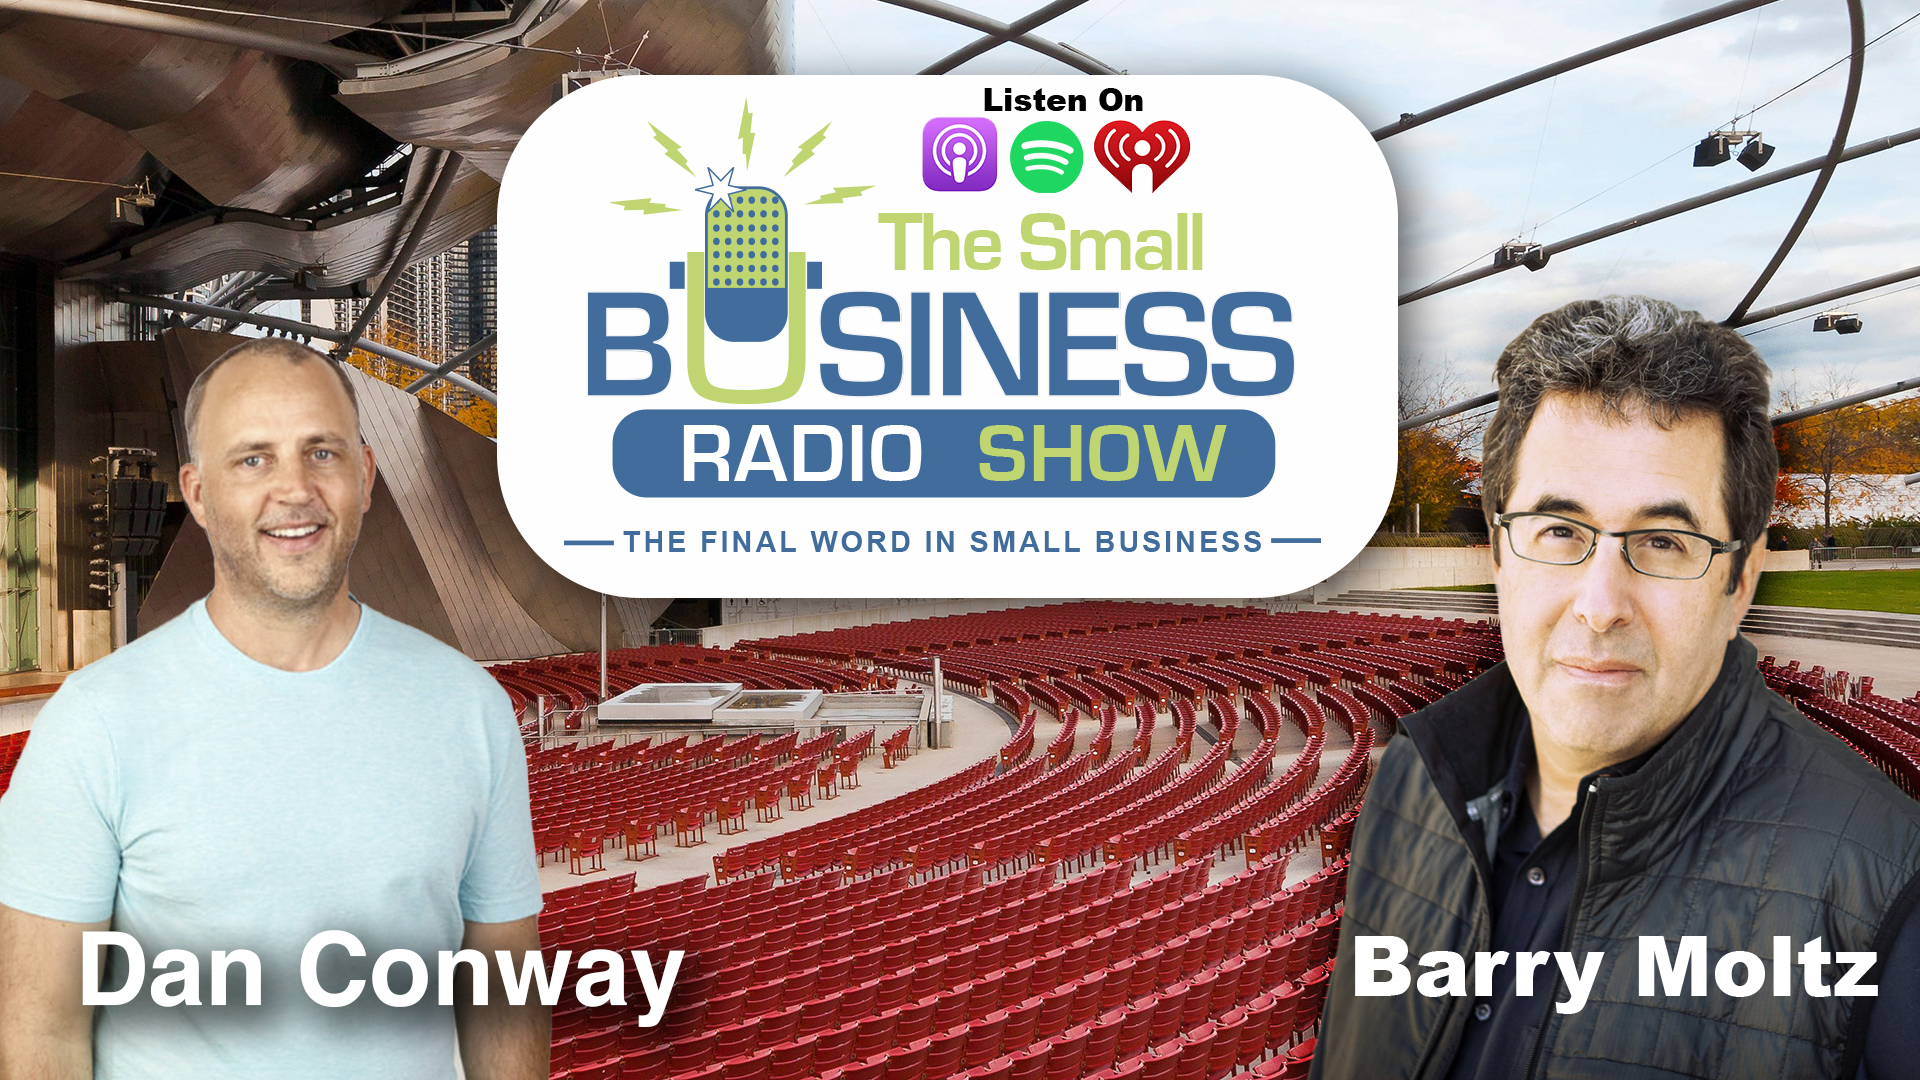 Dan Conway on The Small Business Radio Show